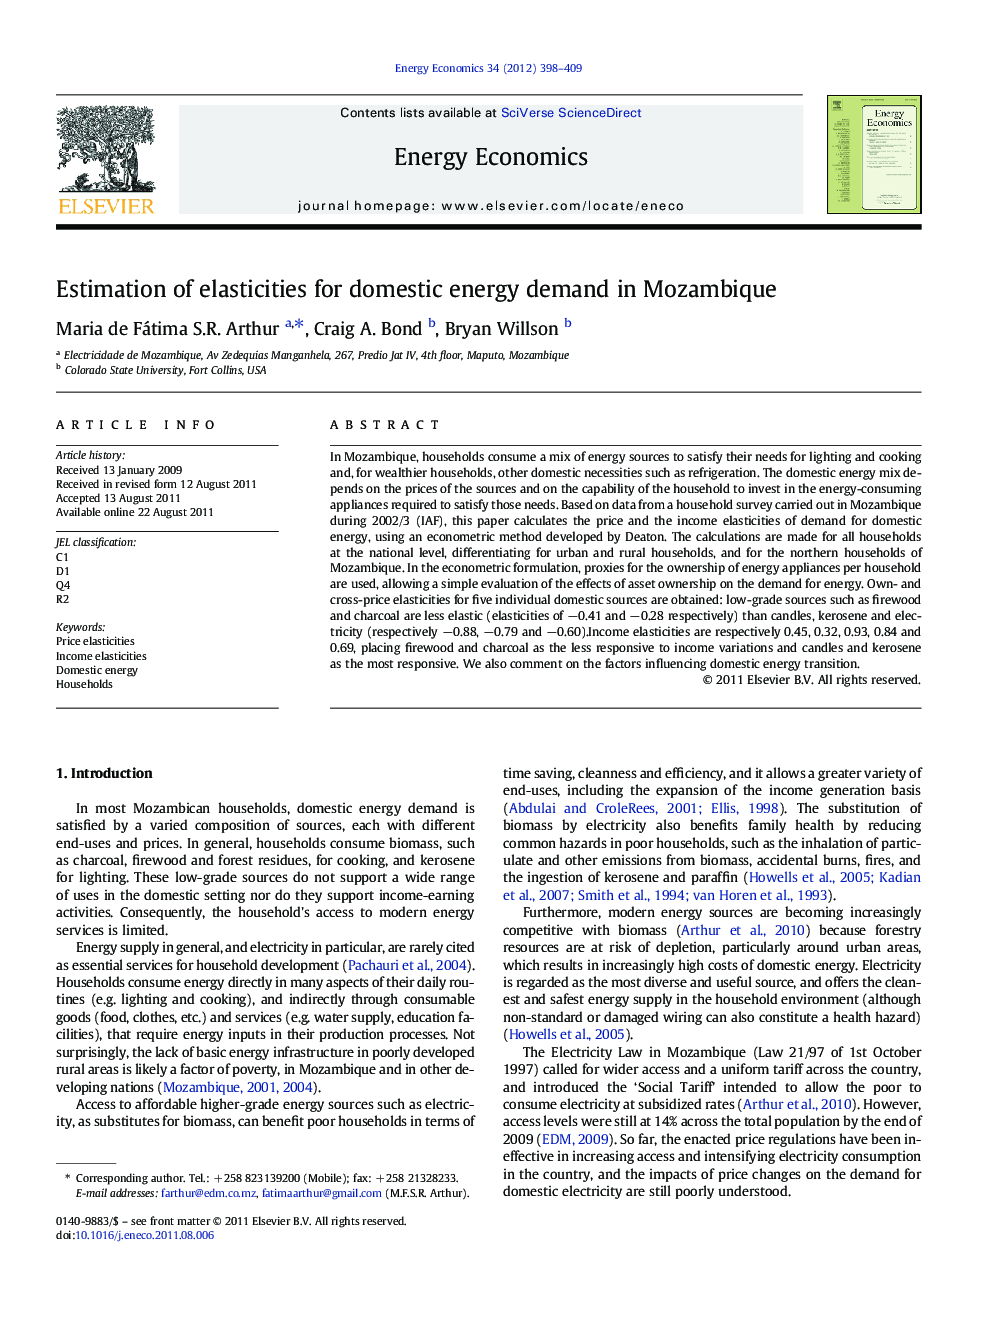 Estimation of elasticities for domestic energy demand in Mozambique